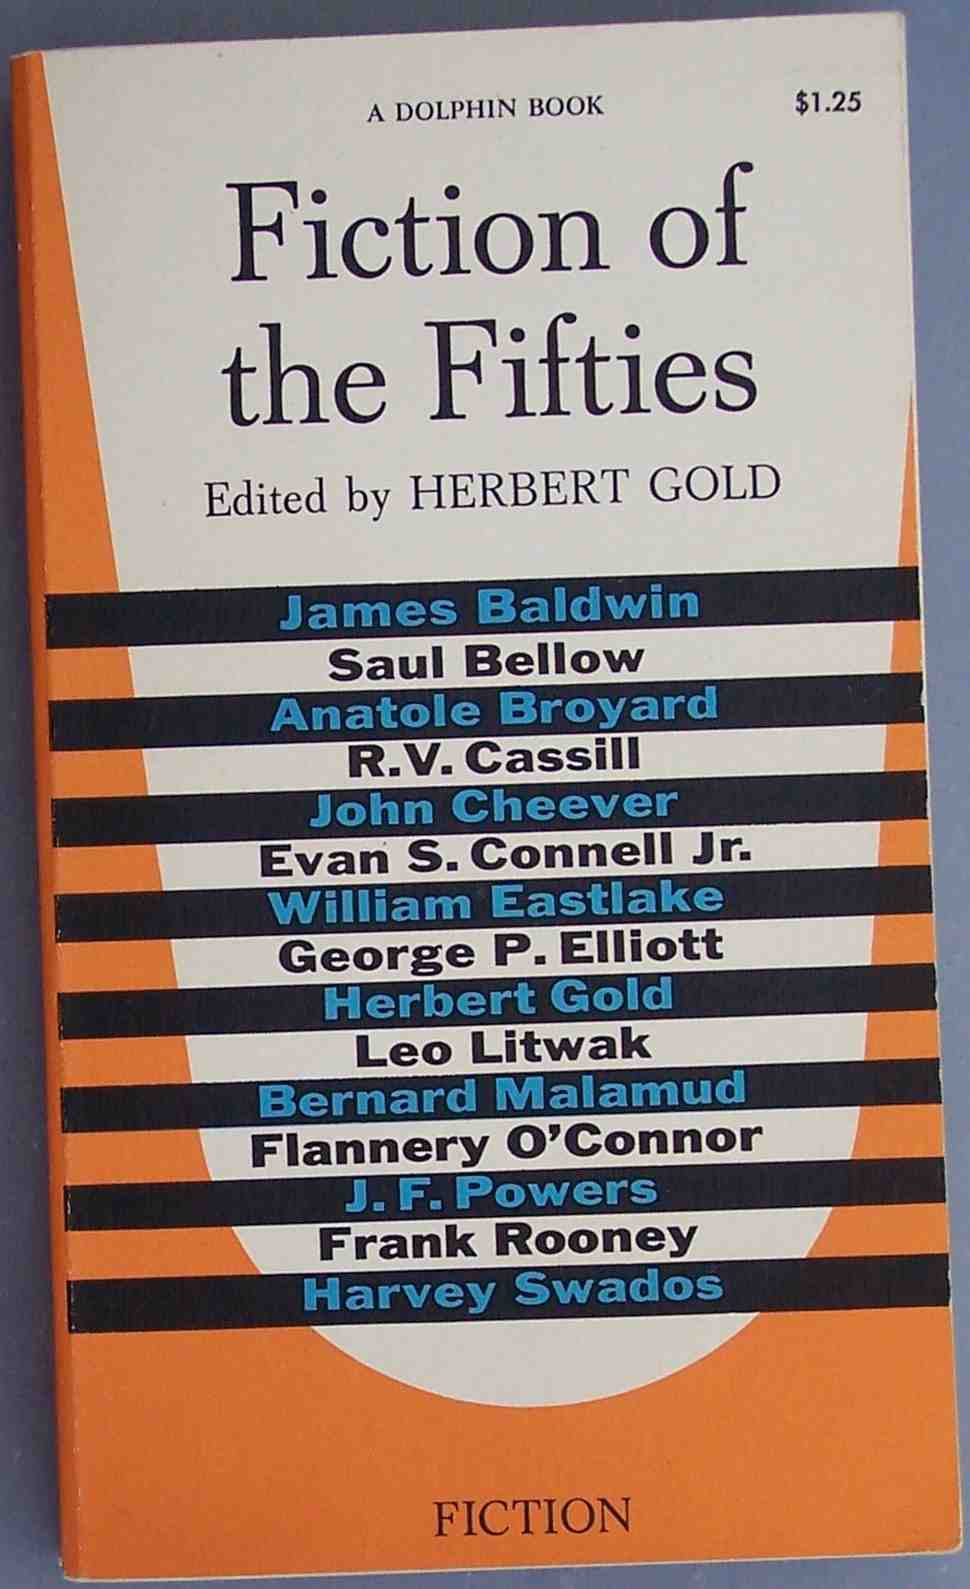 a book on fiction of the fifties with a line of title written